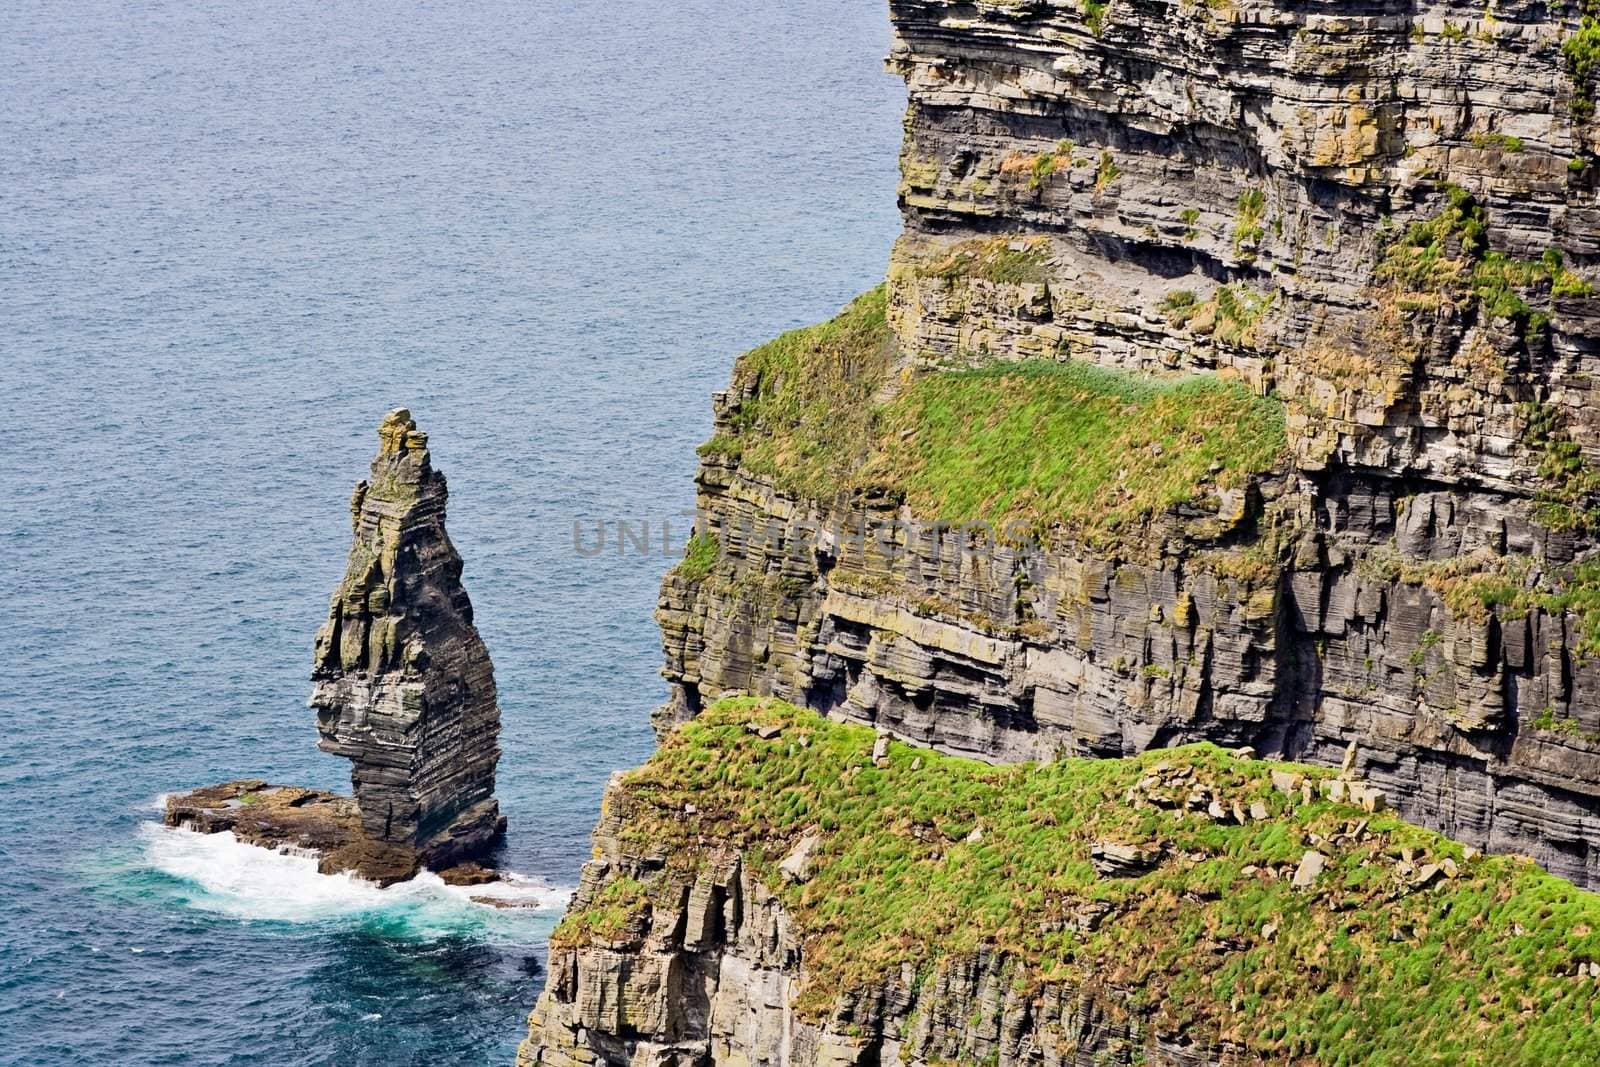 The Cliffs of Moher in County Clare, Ireland. This is on the Atlantic Ocean coastline.